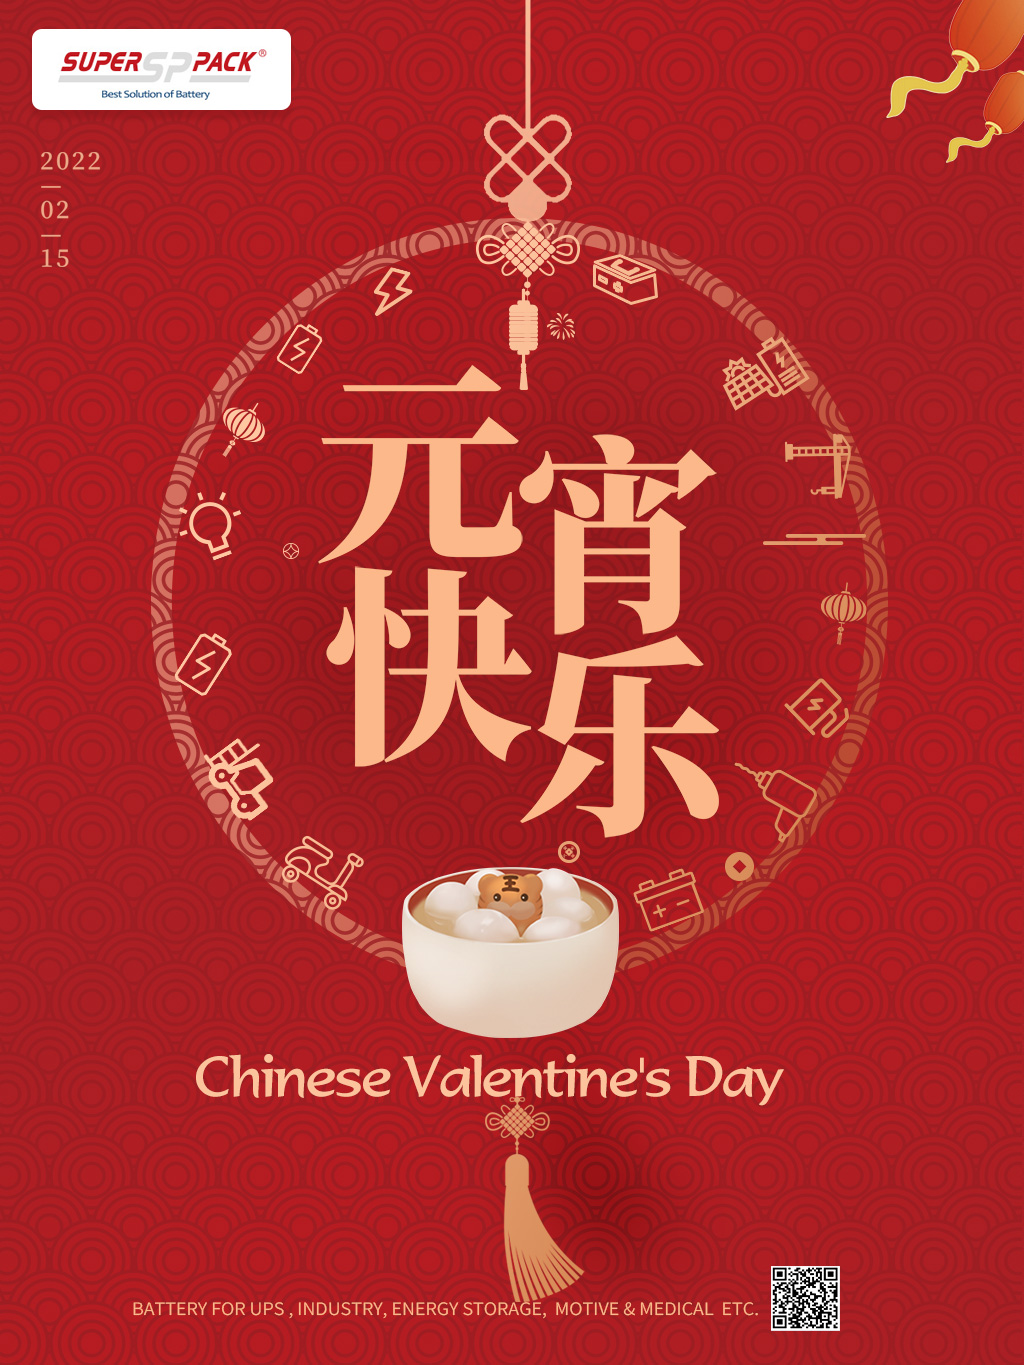 Yuenxiao festival (Chinese Valentine's Day)